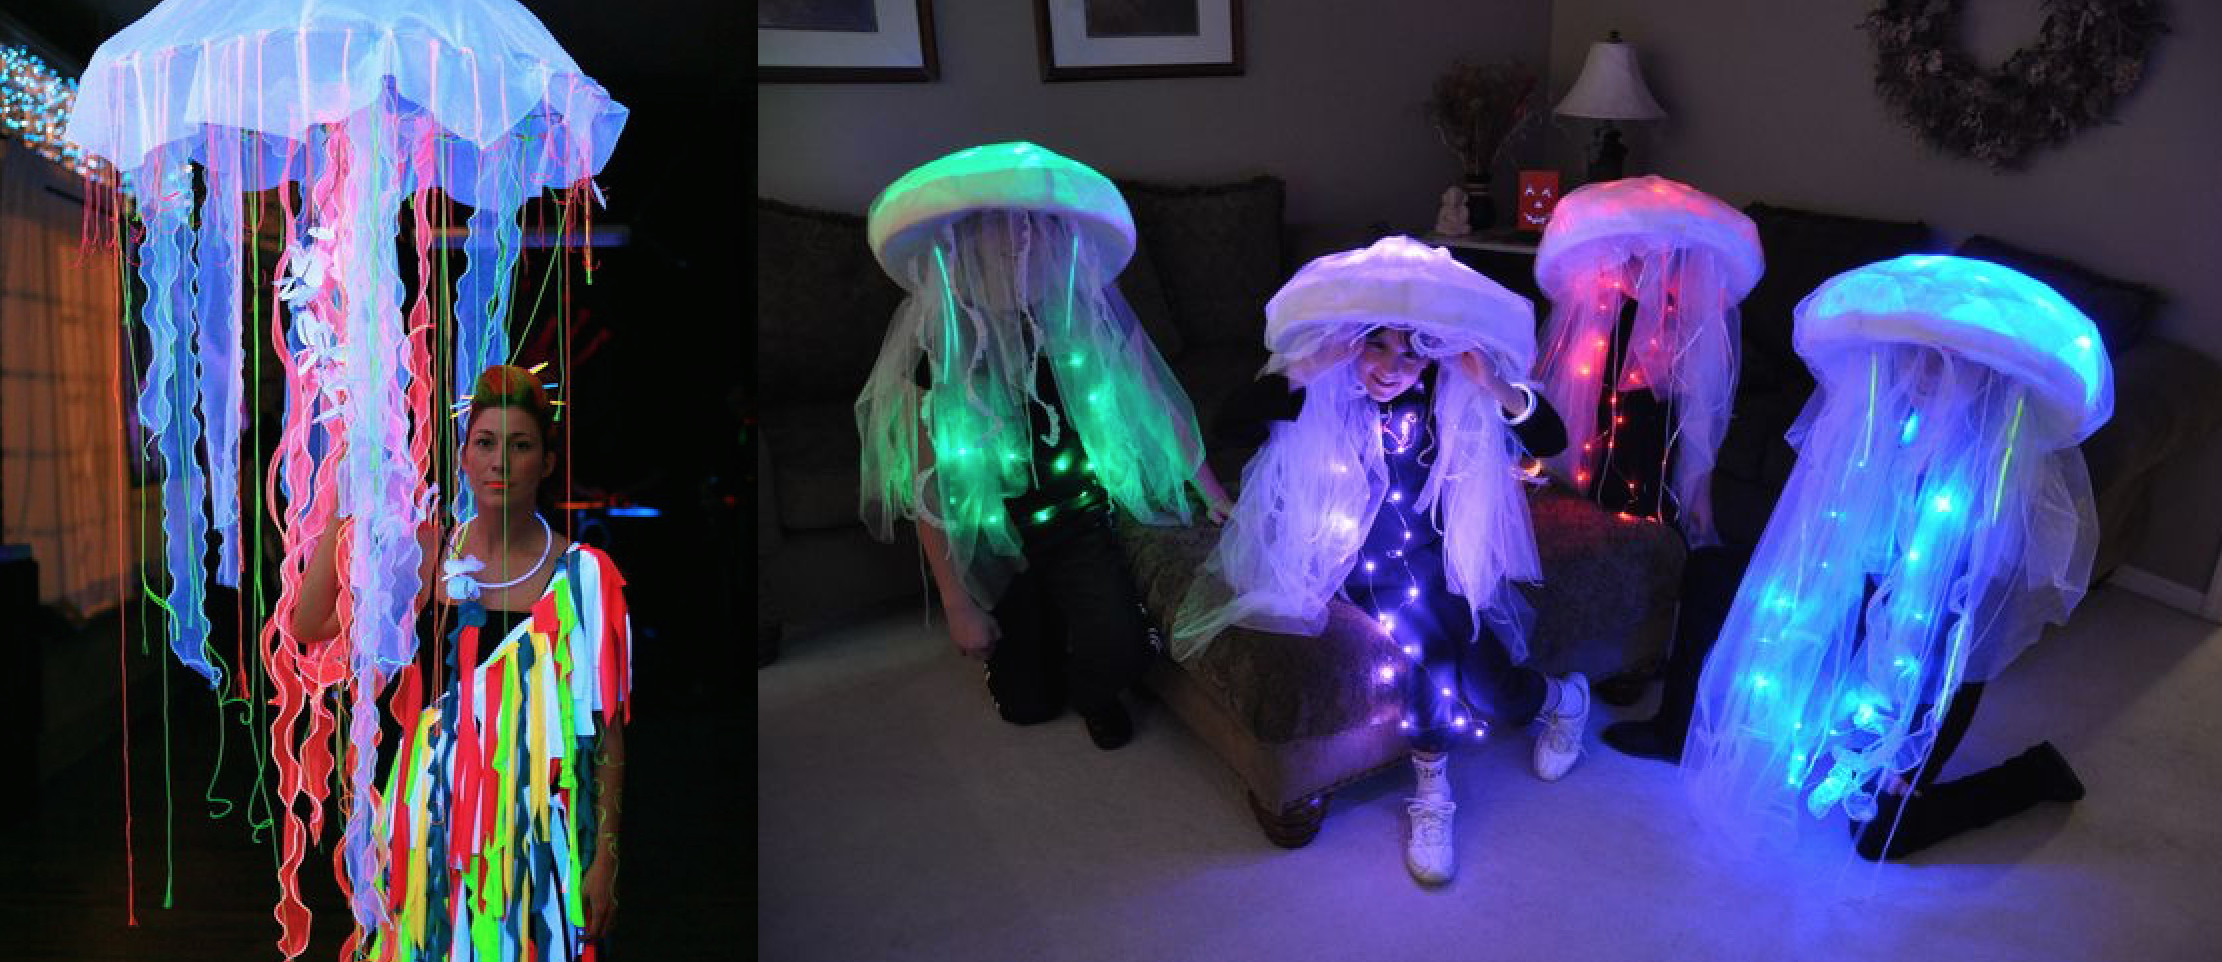 DIY Jellyfish Costume
 Turn heads at any Halloween party with one of these high